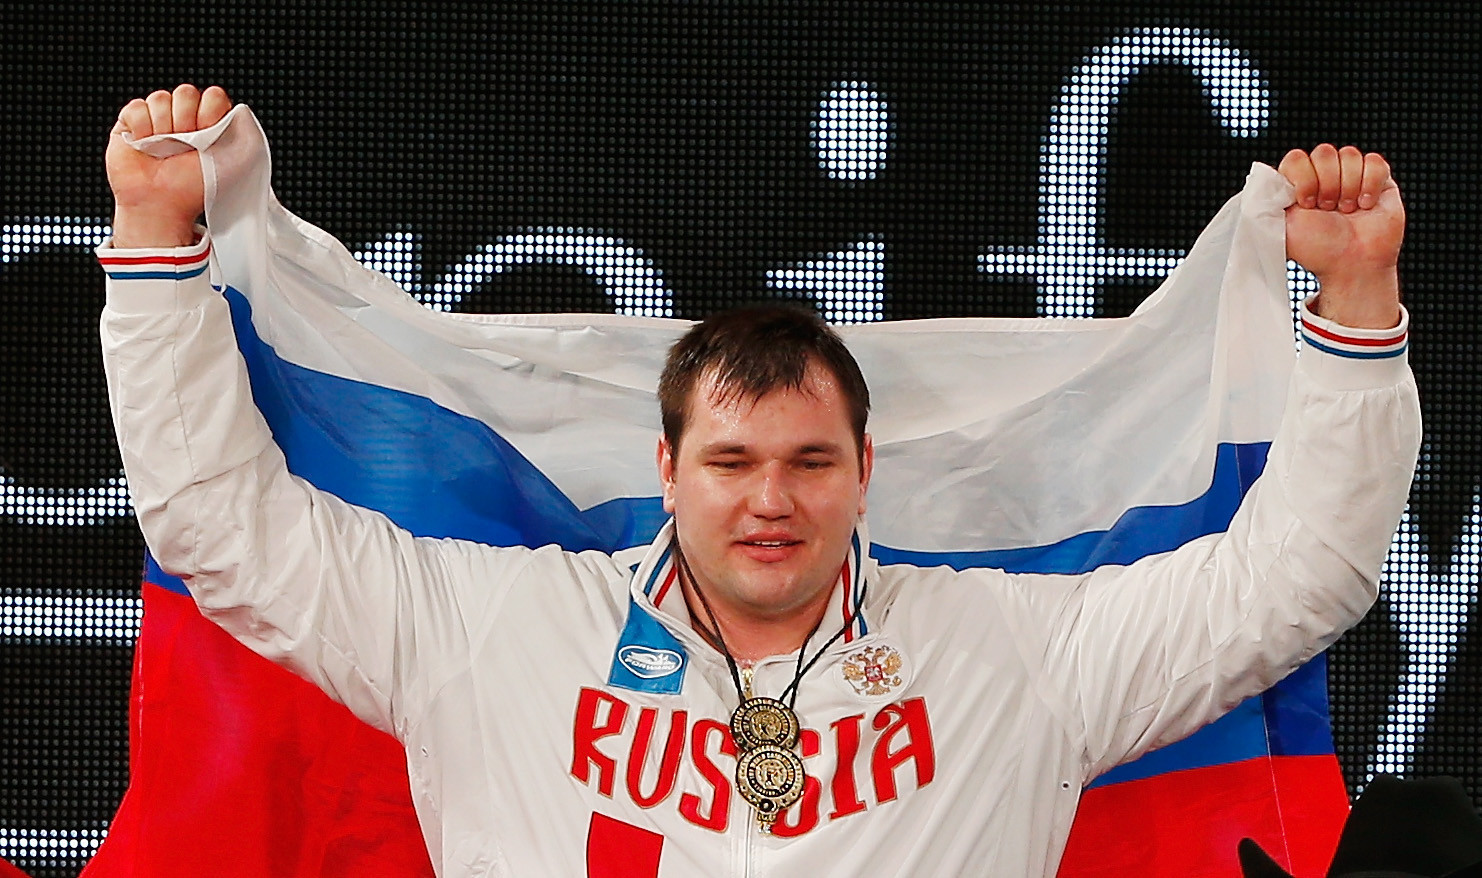 Aleksei Lovchev's world records were disqualified as part of his ban ©Getty Images